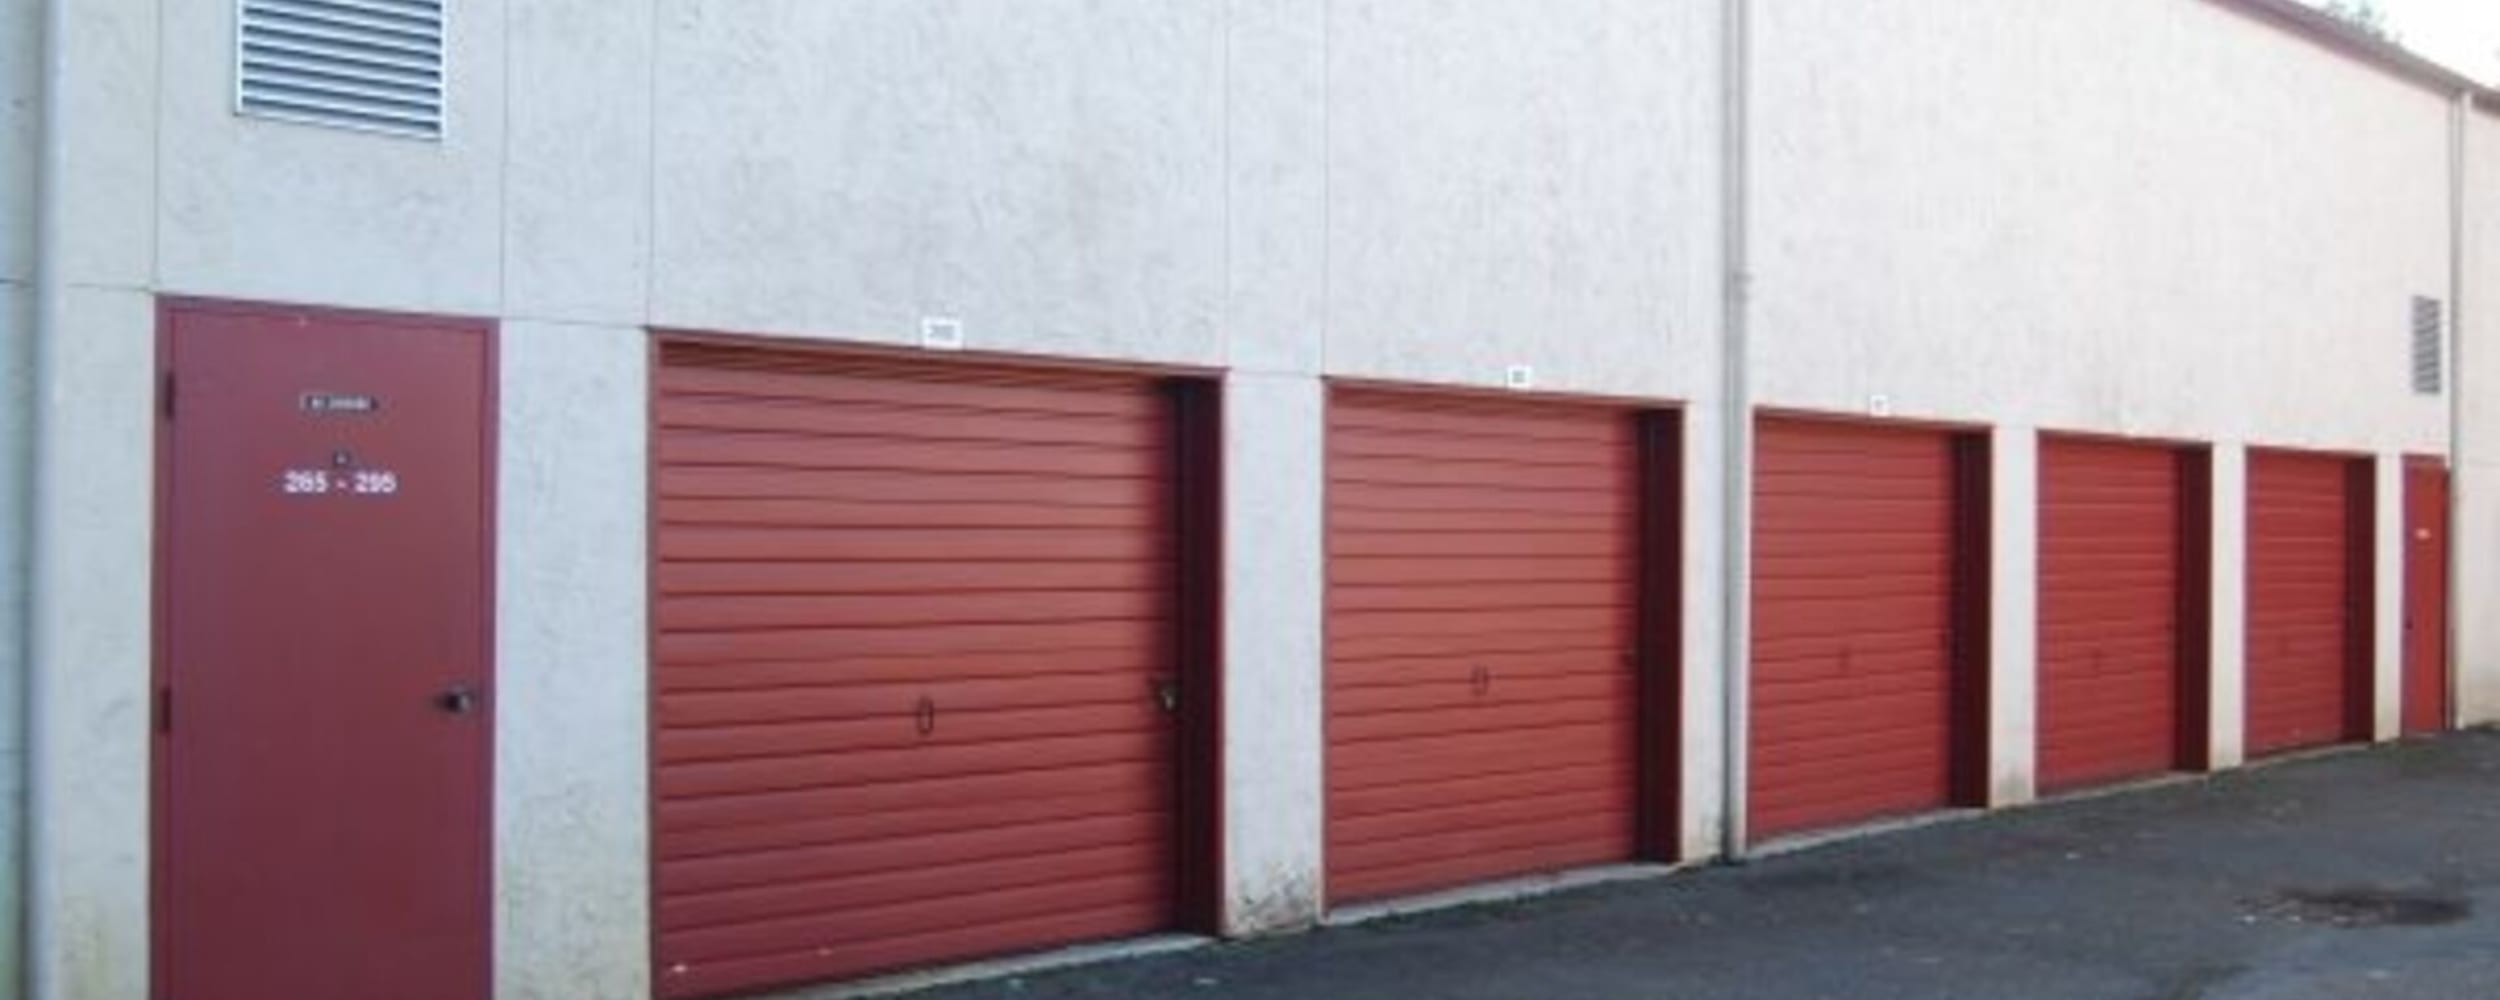 Large units at Space Station Self Storage in Port Orchard, Washington